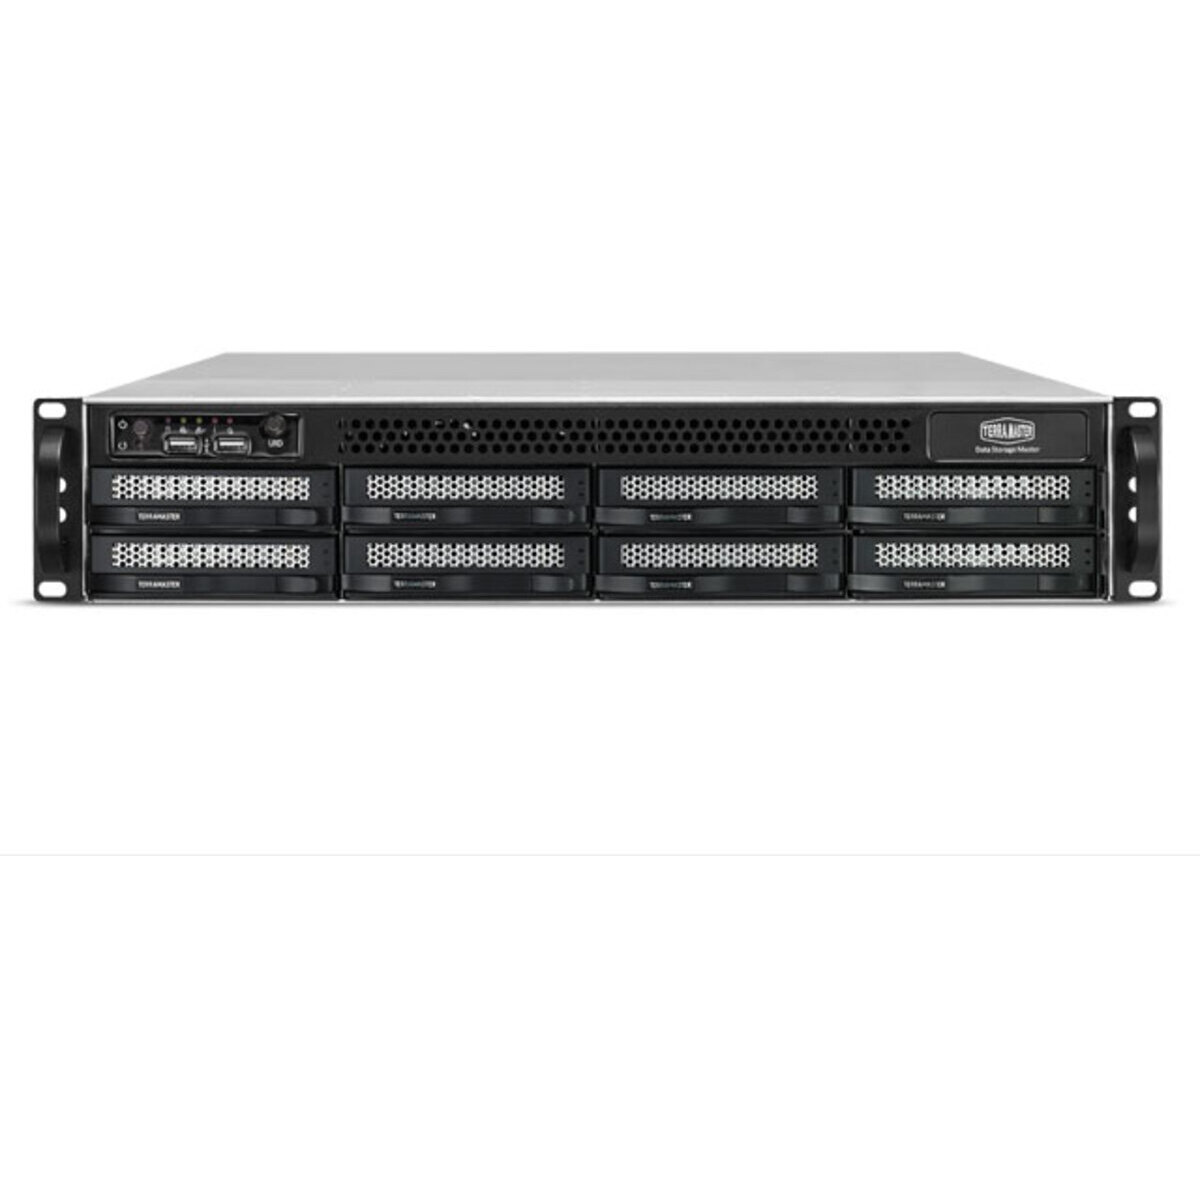 TerraMaster U8-522-9400 72tb 8-Bay RackMount Large Business / Enterprise NAS - Network Attached Storage Device 6x12tb Seagate IronWolf ST12000VN0008 3.5 7200rpm SATA 6Gb/s HDD NAS Class Drives Installed - Burn-In Tested U8-522-9400